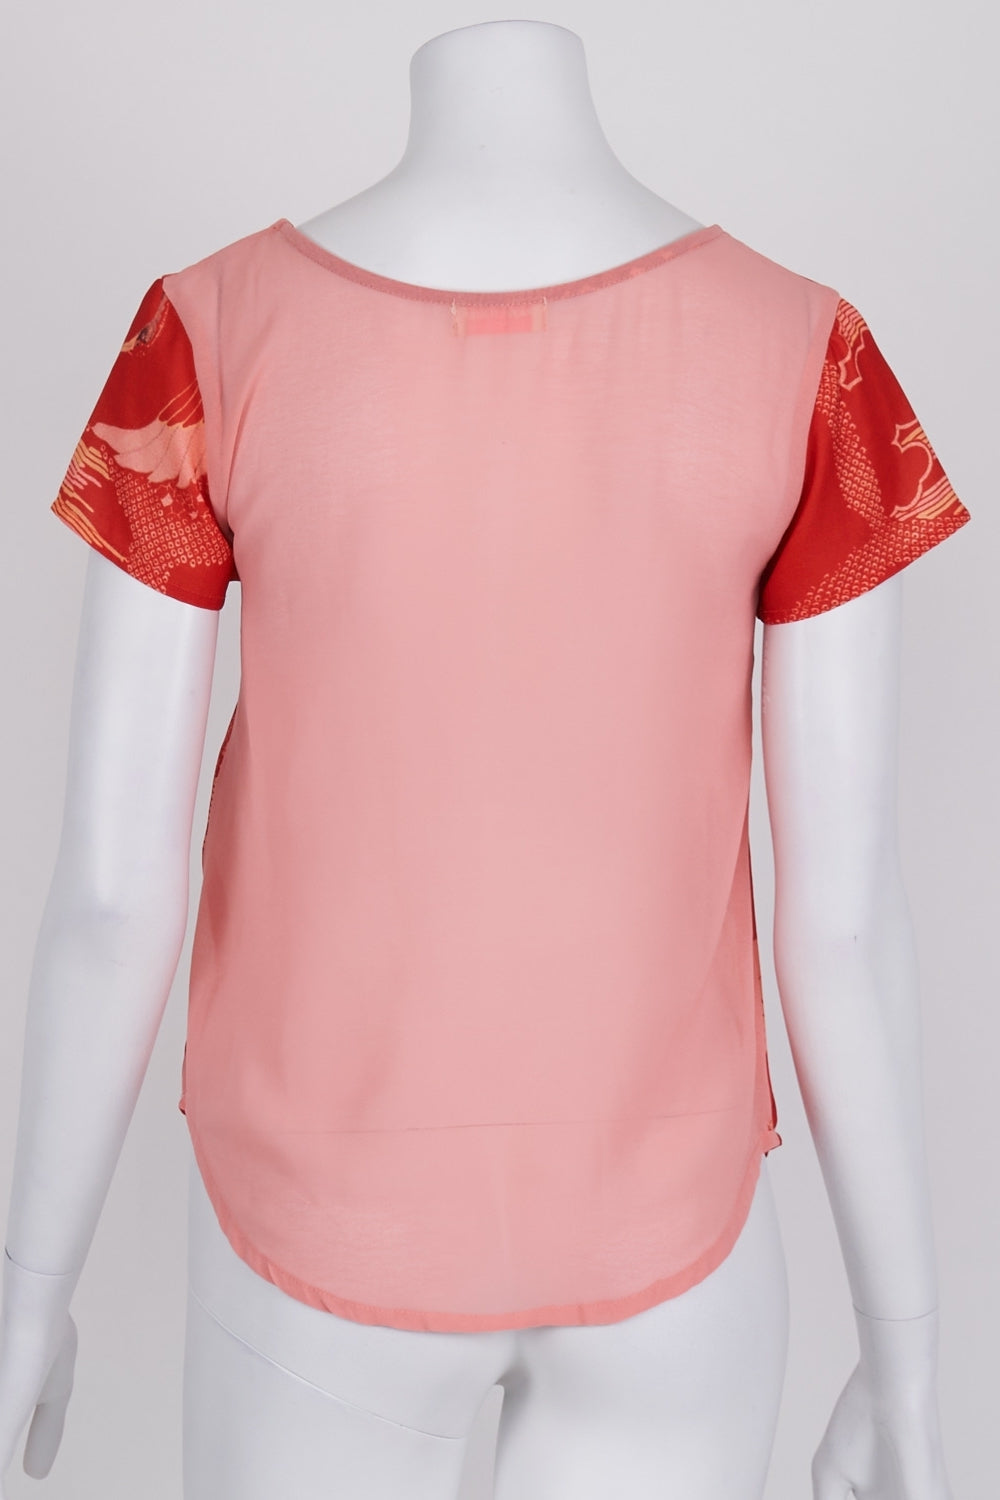 Paint It Red Patterned Sheer Top XS